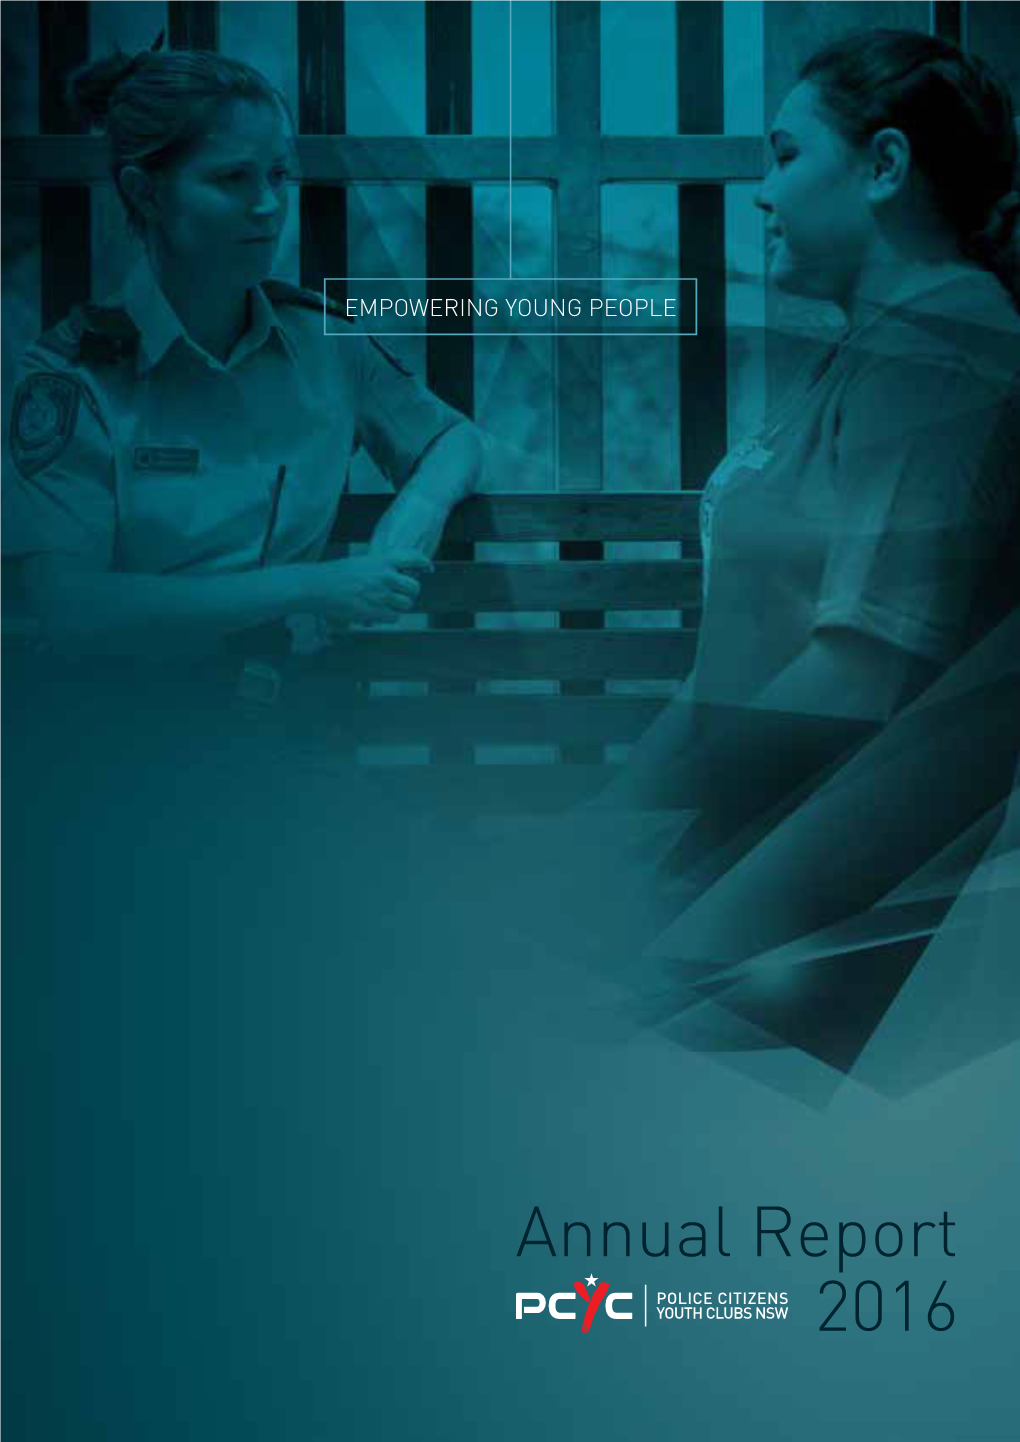 Annual Report 2016: 3 Chairman’S I Have Much Pleasure in Presenting the 2016 Annual Report for PCYC NSW, Ltd